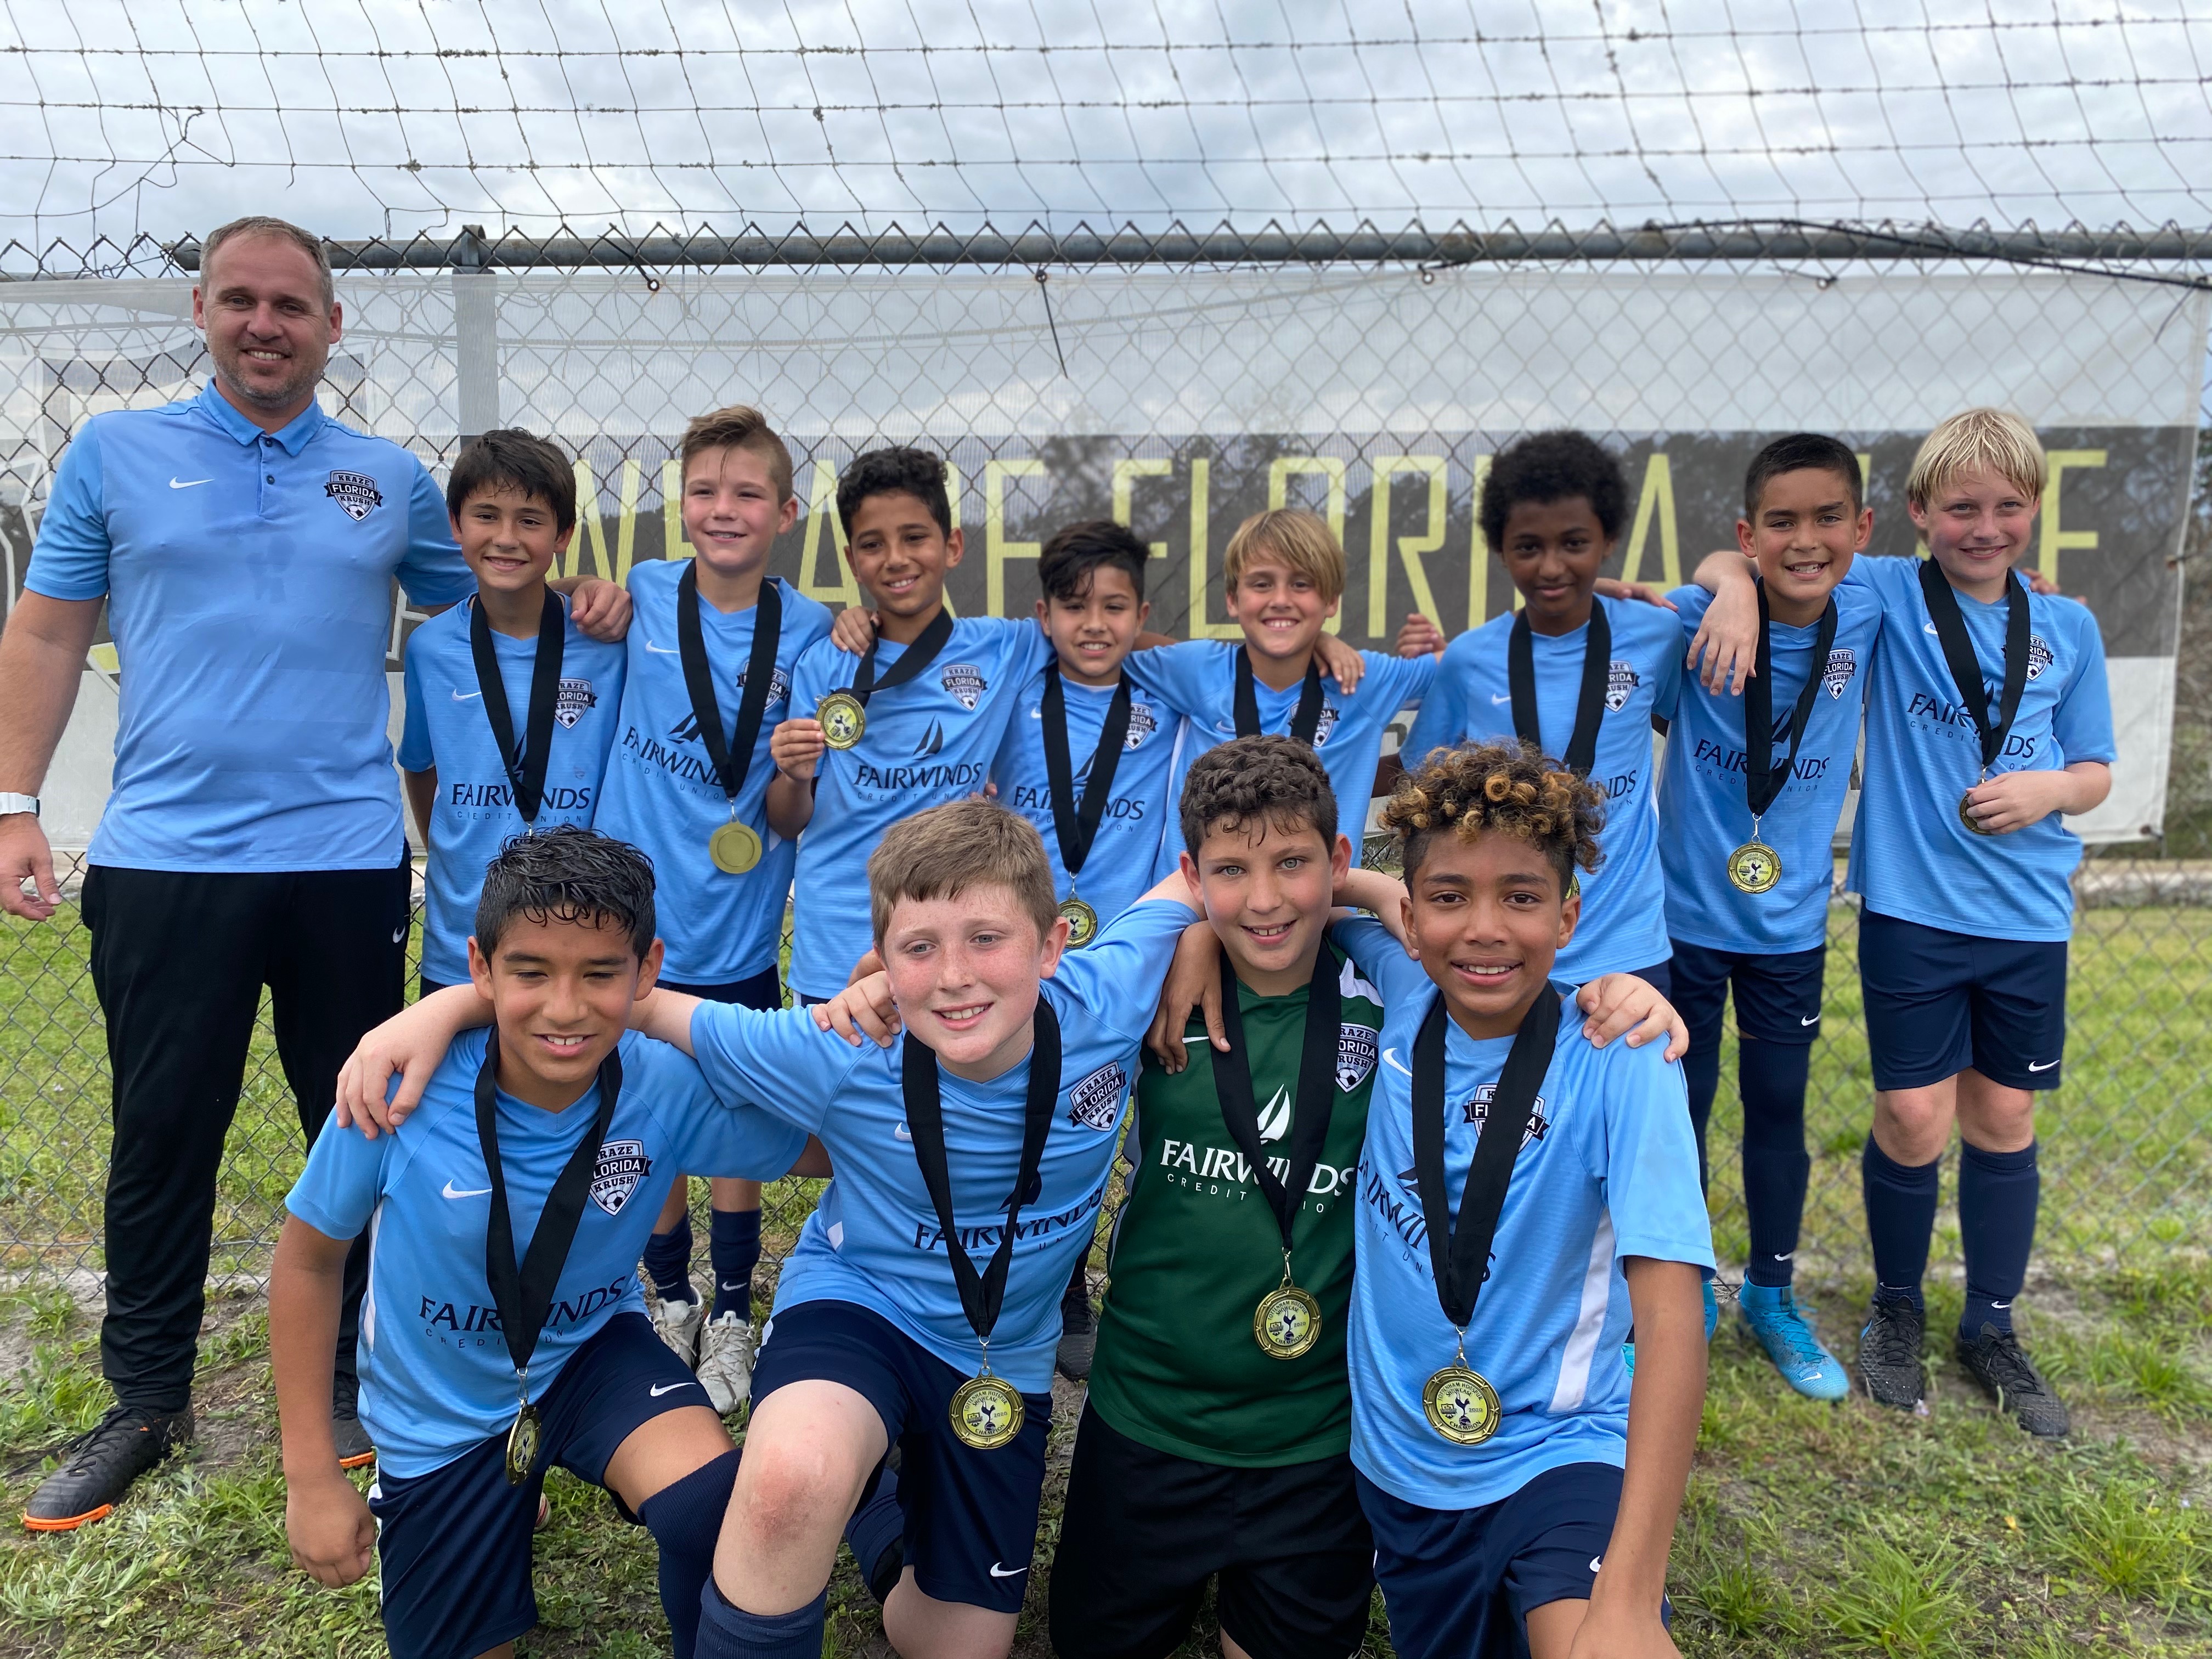 Florida Kraze Krush on Twitter: "Congratulations to the following teams who participated in tournaments this weekend! 09 Kraze NPL - Tottenham Hotspur Showcase Champions! 08 Kraze NPL - Tottenham Hotspur Showcase Finalists!